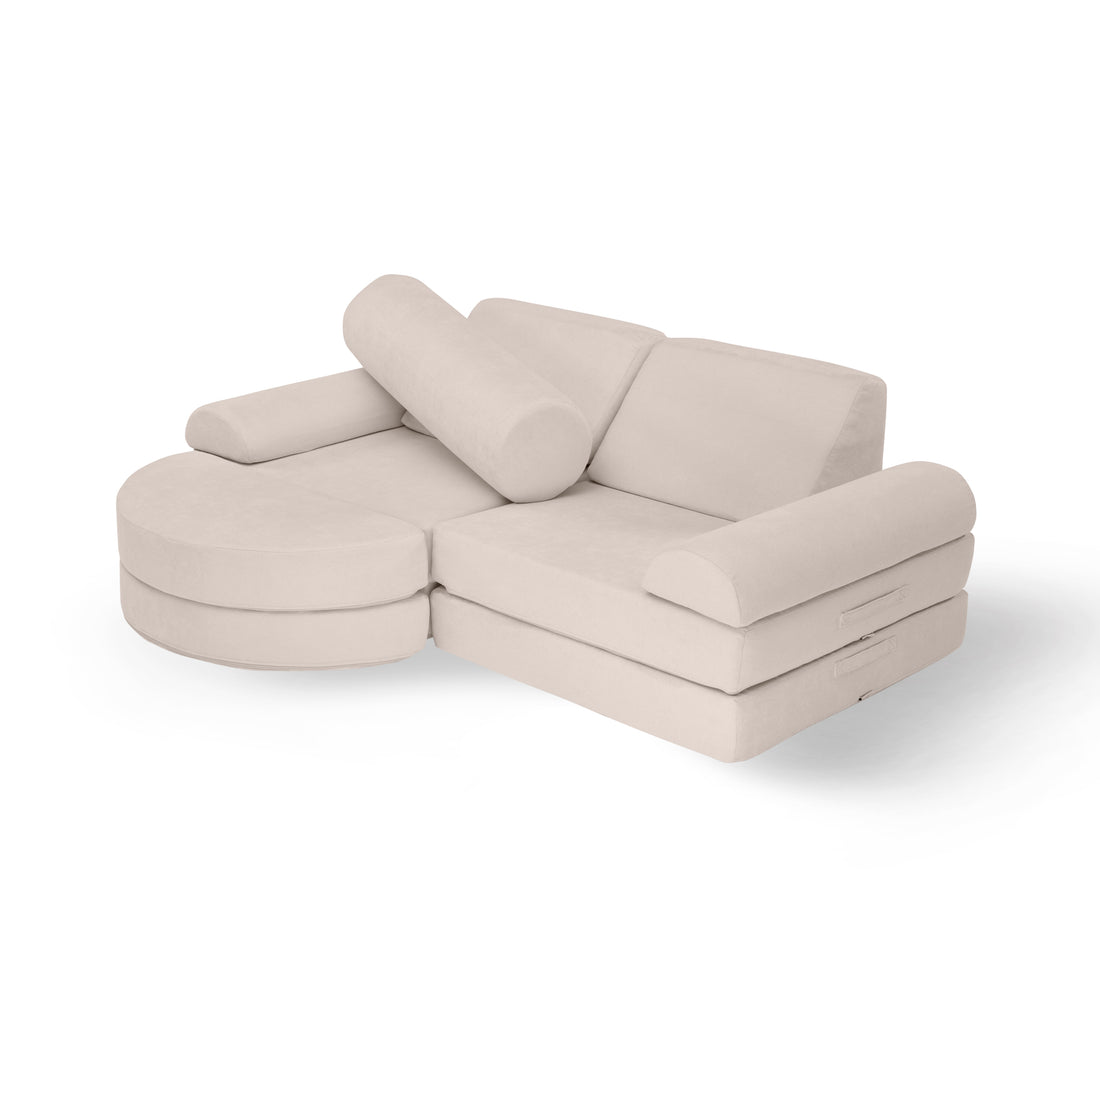 membina perfect play couch with roller bolster from a 45 degree angle